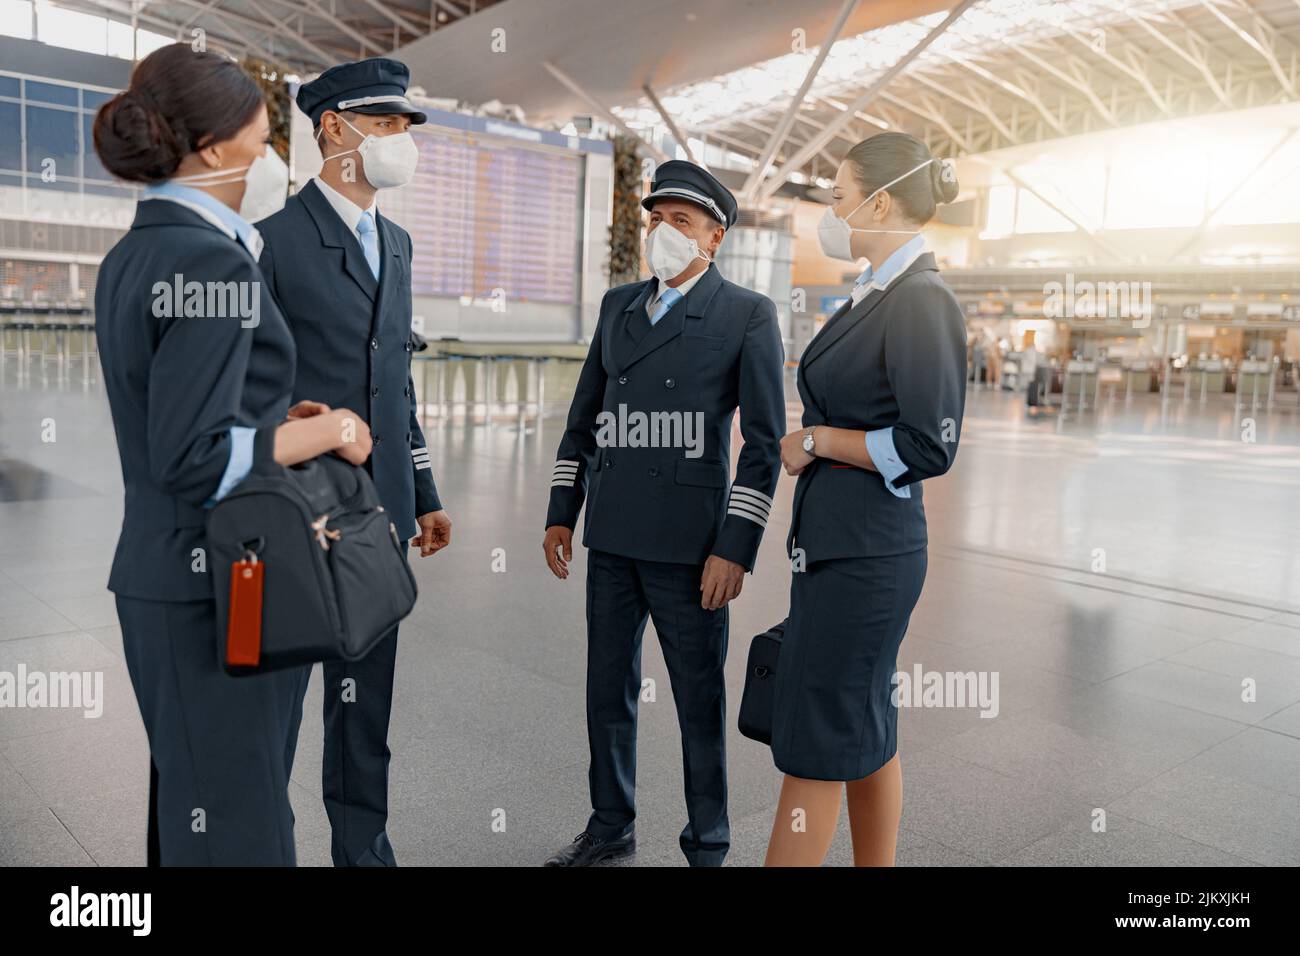 Plane team in masks talking in airport terminal Stock Photo